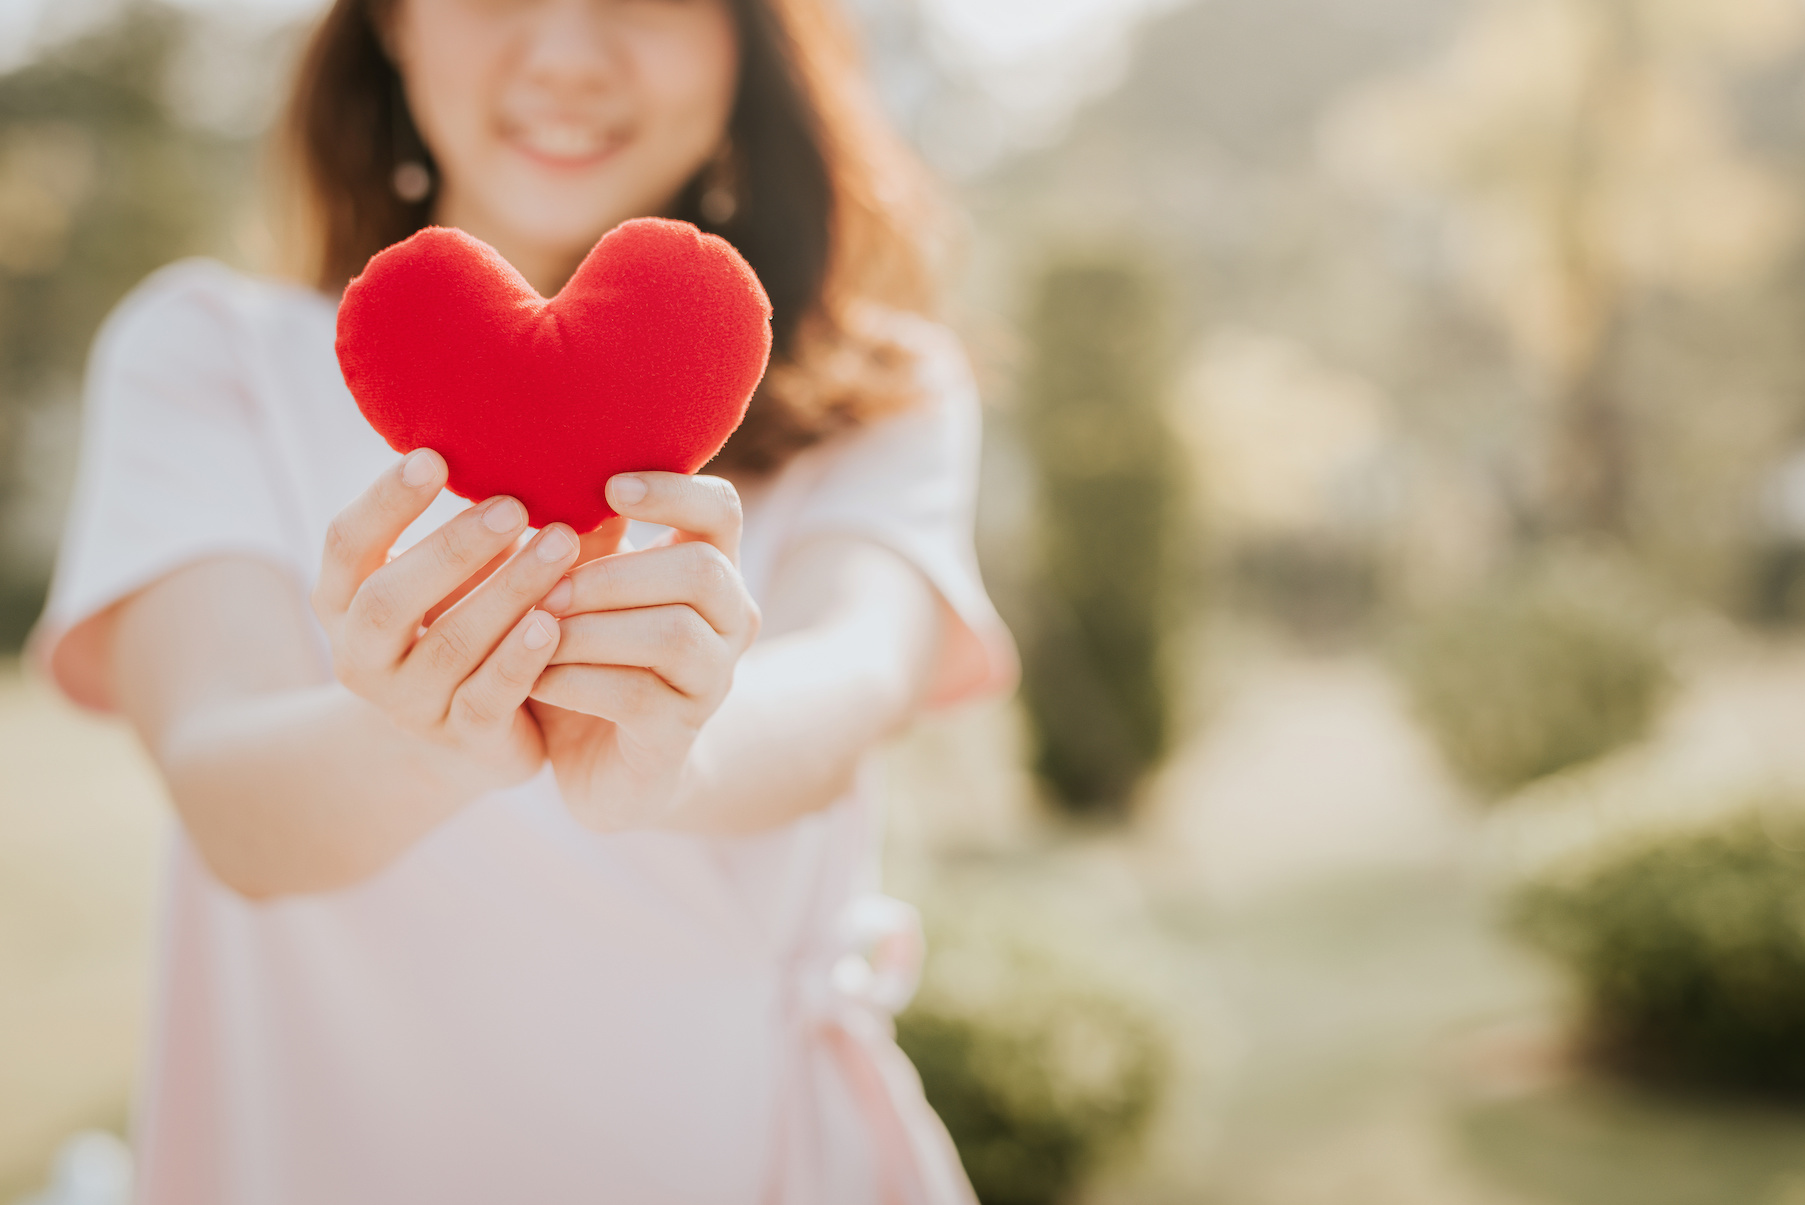 A woman holding up a red heart to show how important heart health is for women.